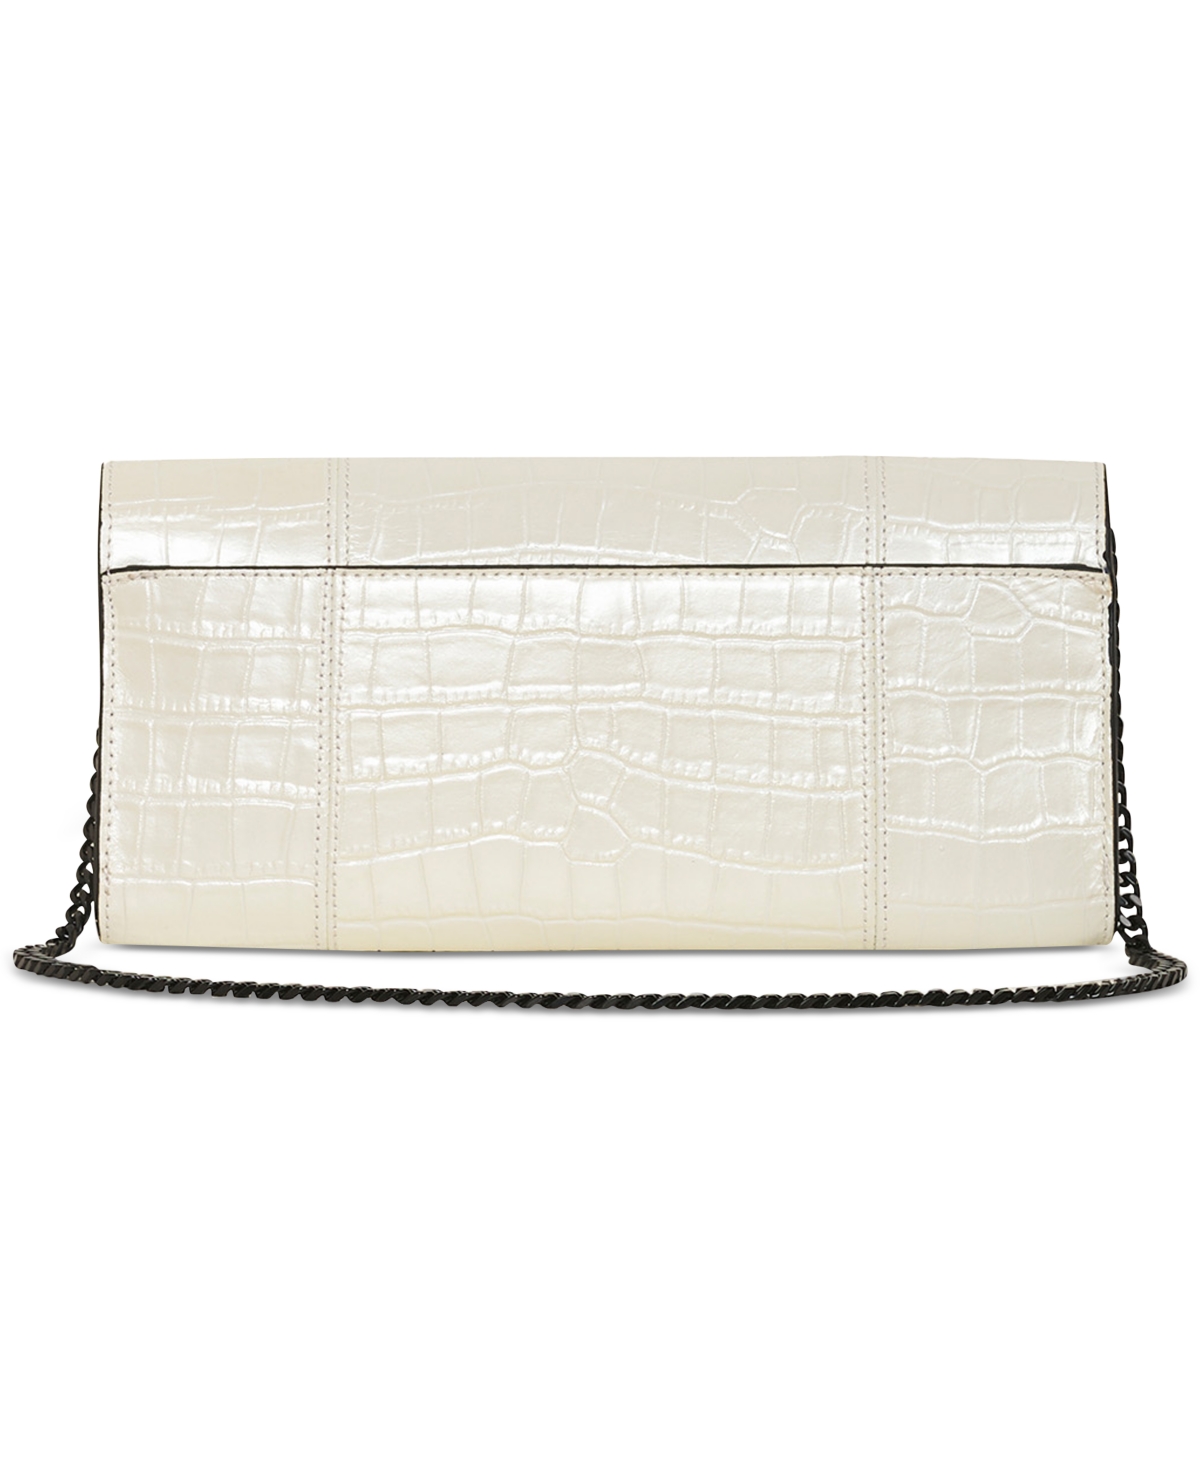 Karl Lagerfeld Albertine Small Embossed Leather Clutch In Wntr Wht,s